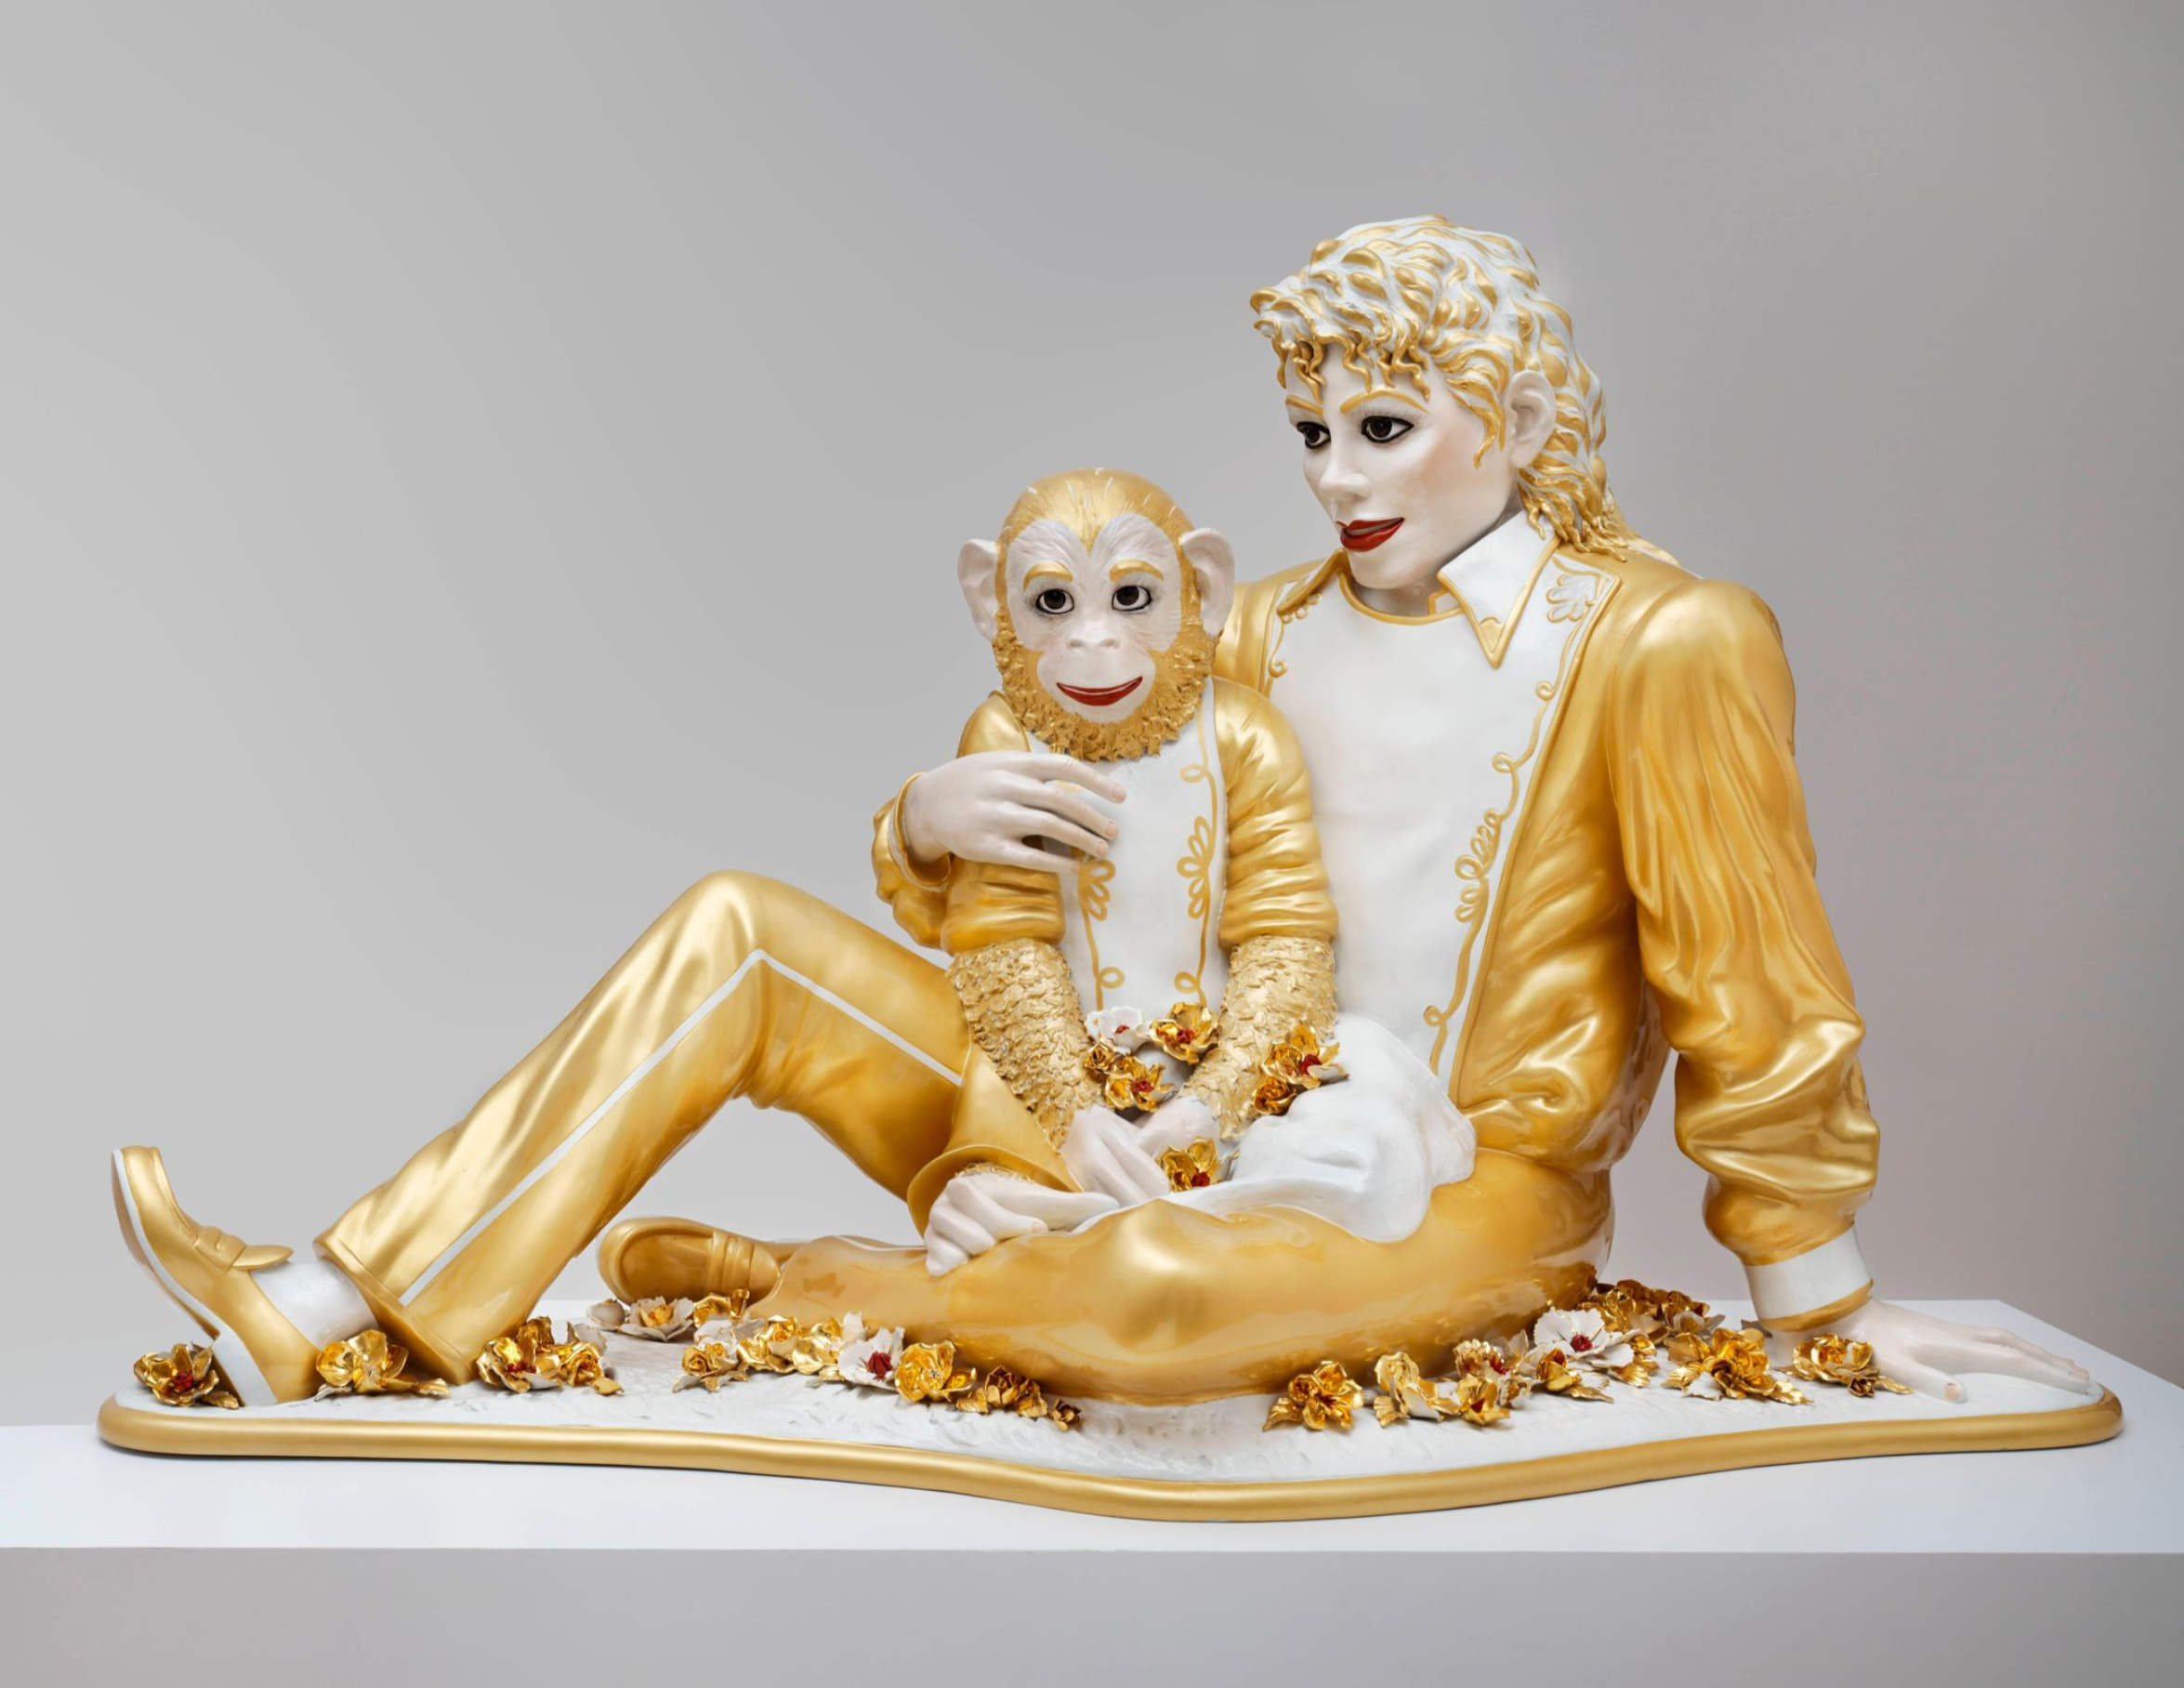 Michael Jackson and Bubbles by Jeff Koons